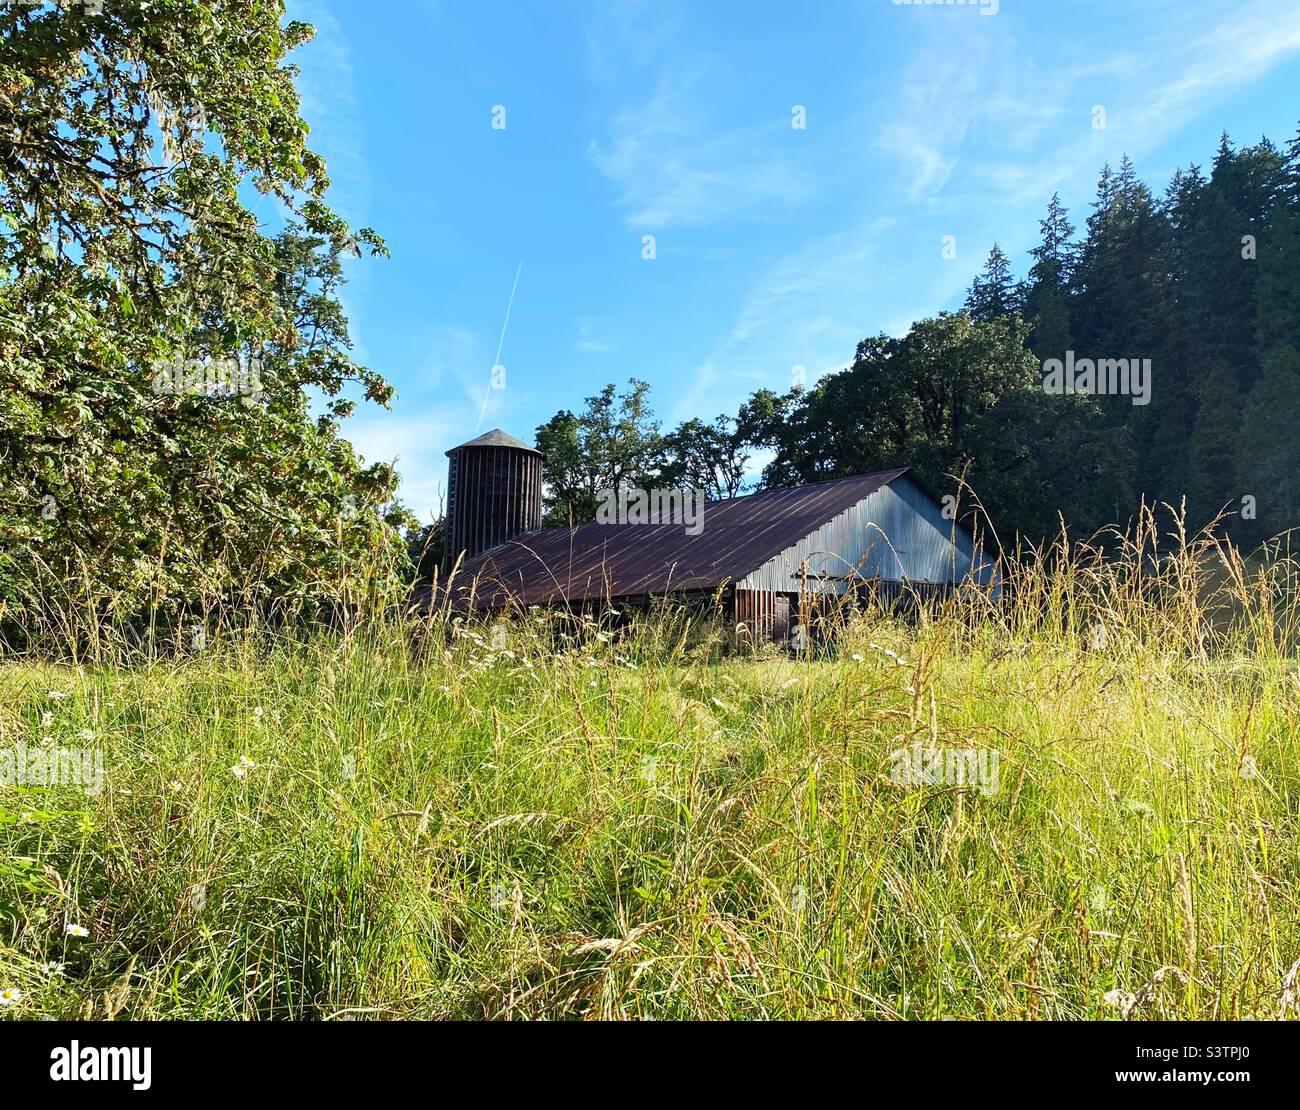 An old wooden barn in a meadow in summertime. Stock Photo